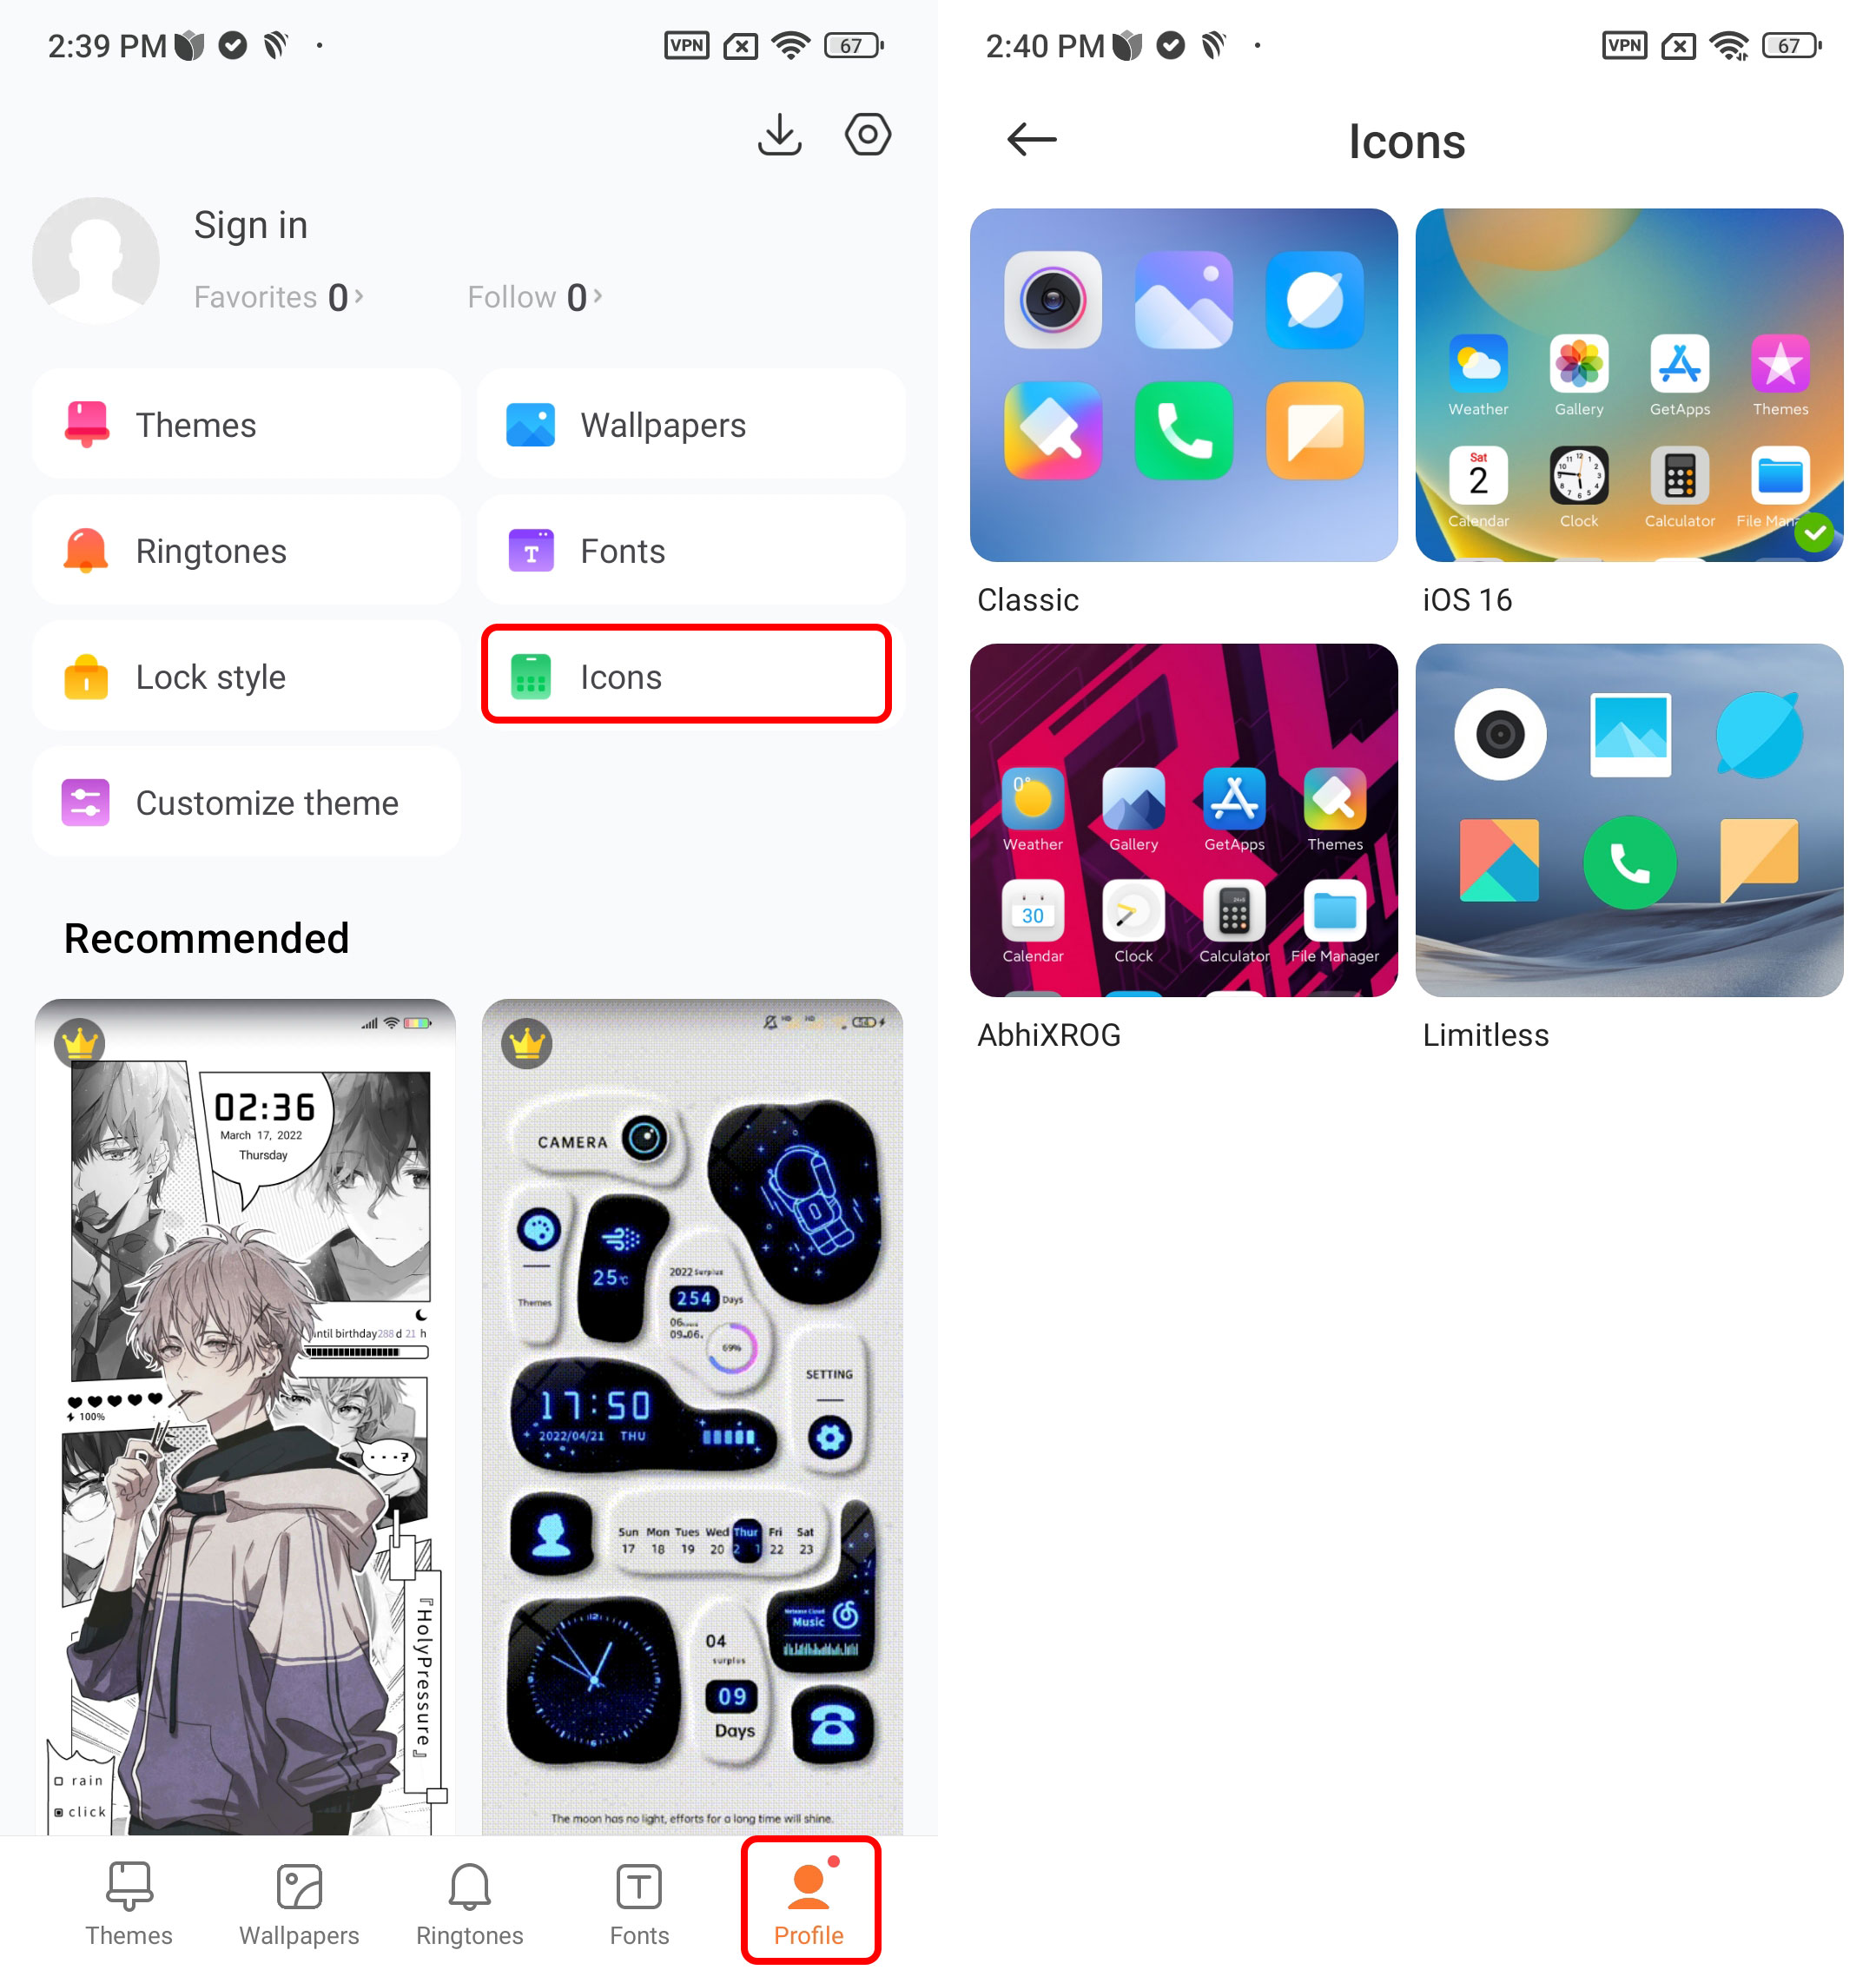 Changing the icon on the Xiaomi phone